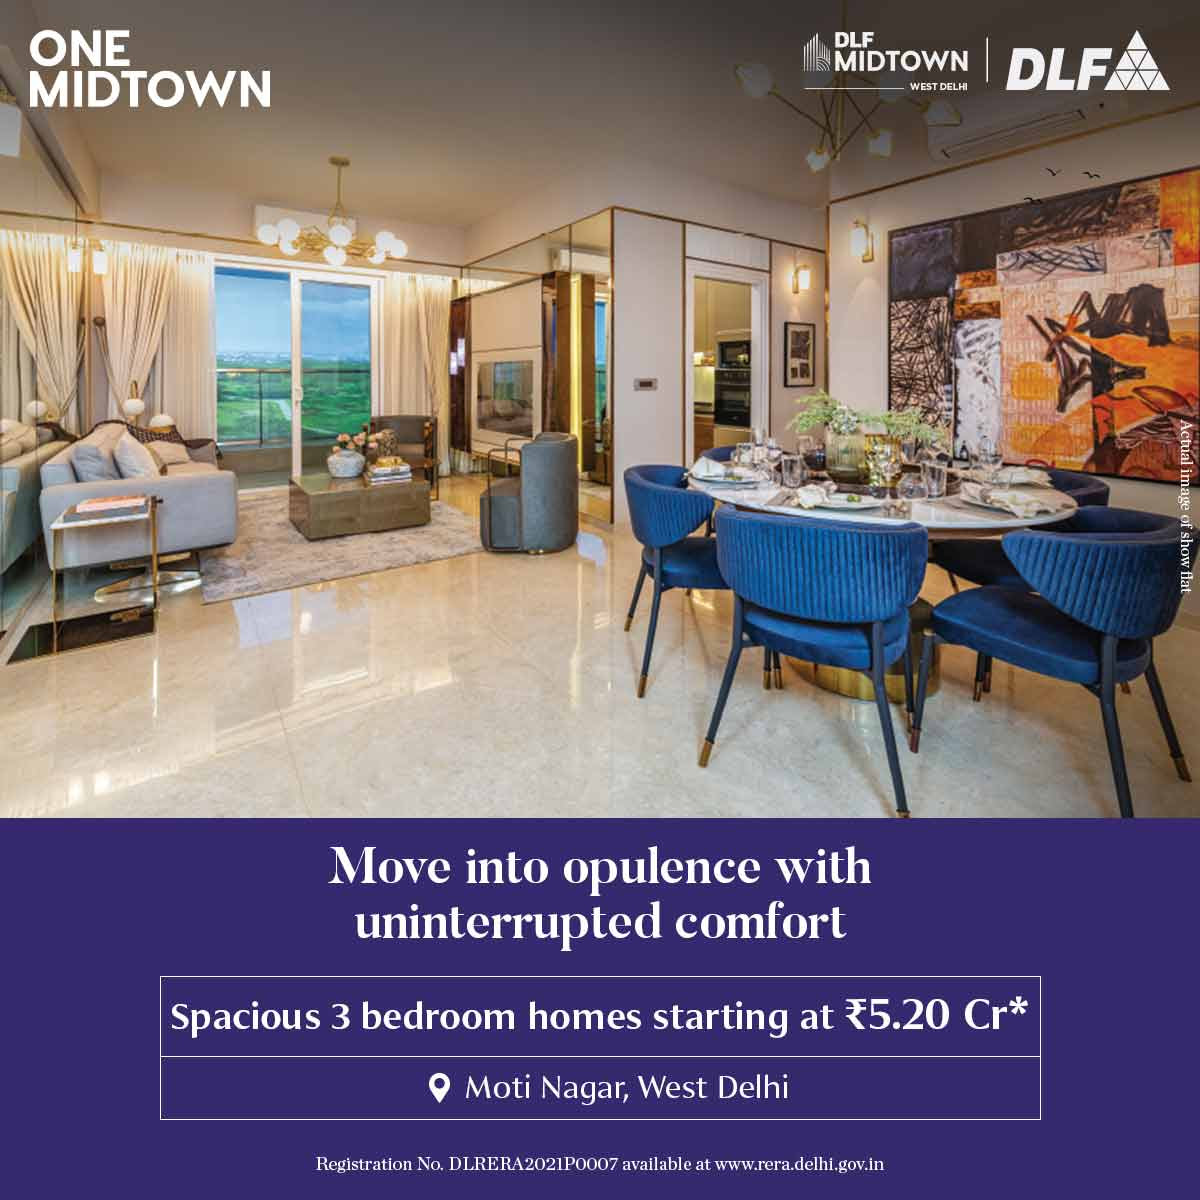 Move into opulence with uninterrupted comfort at DLF One Midtown in Moti Nagar, New Delhi Update